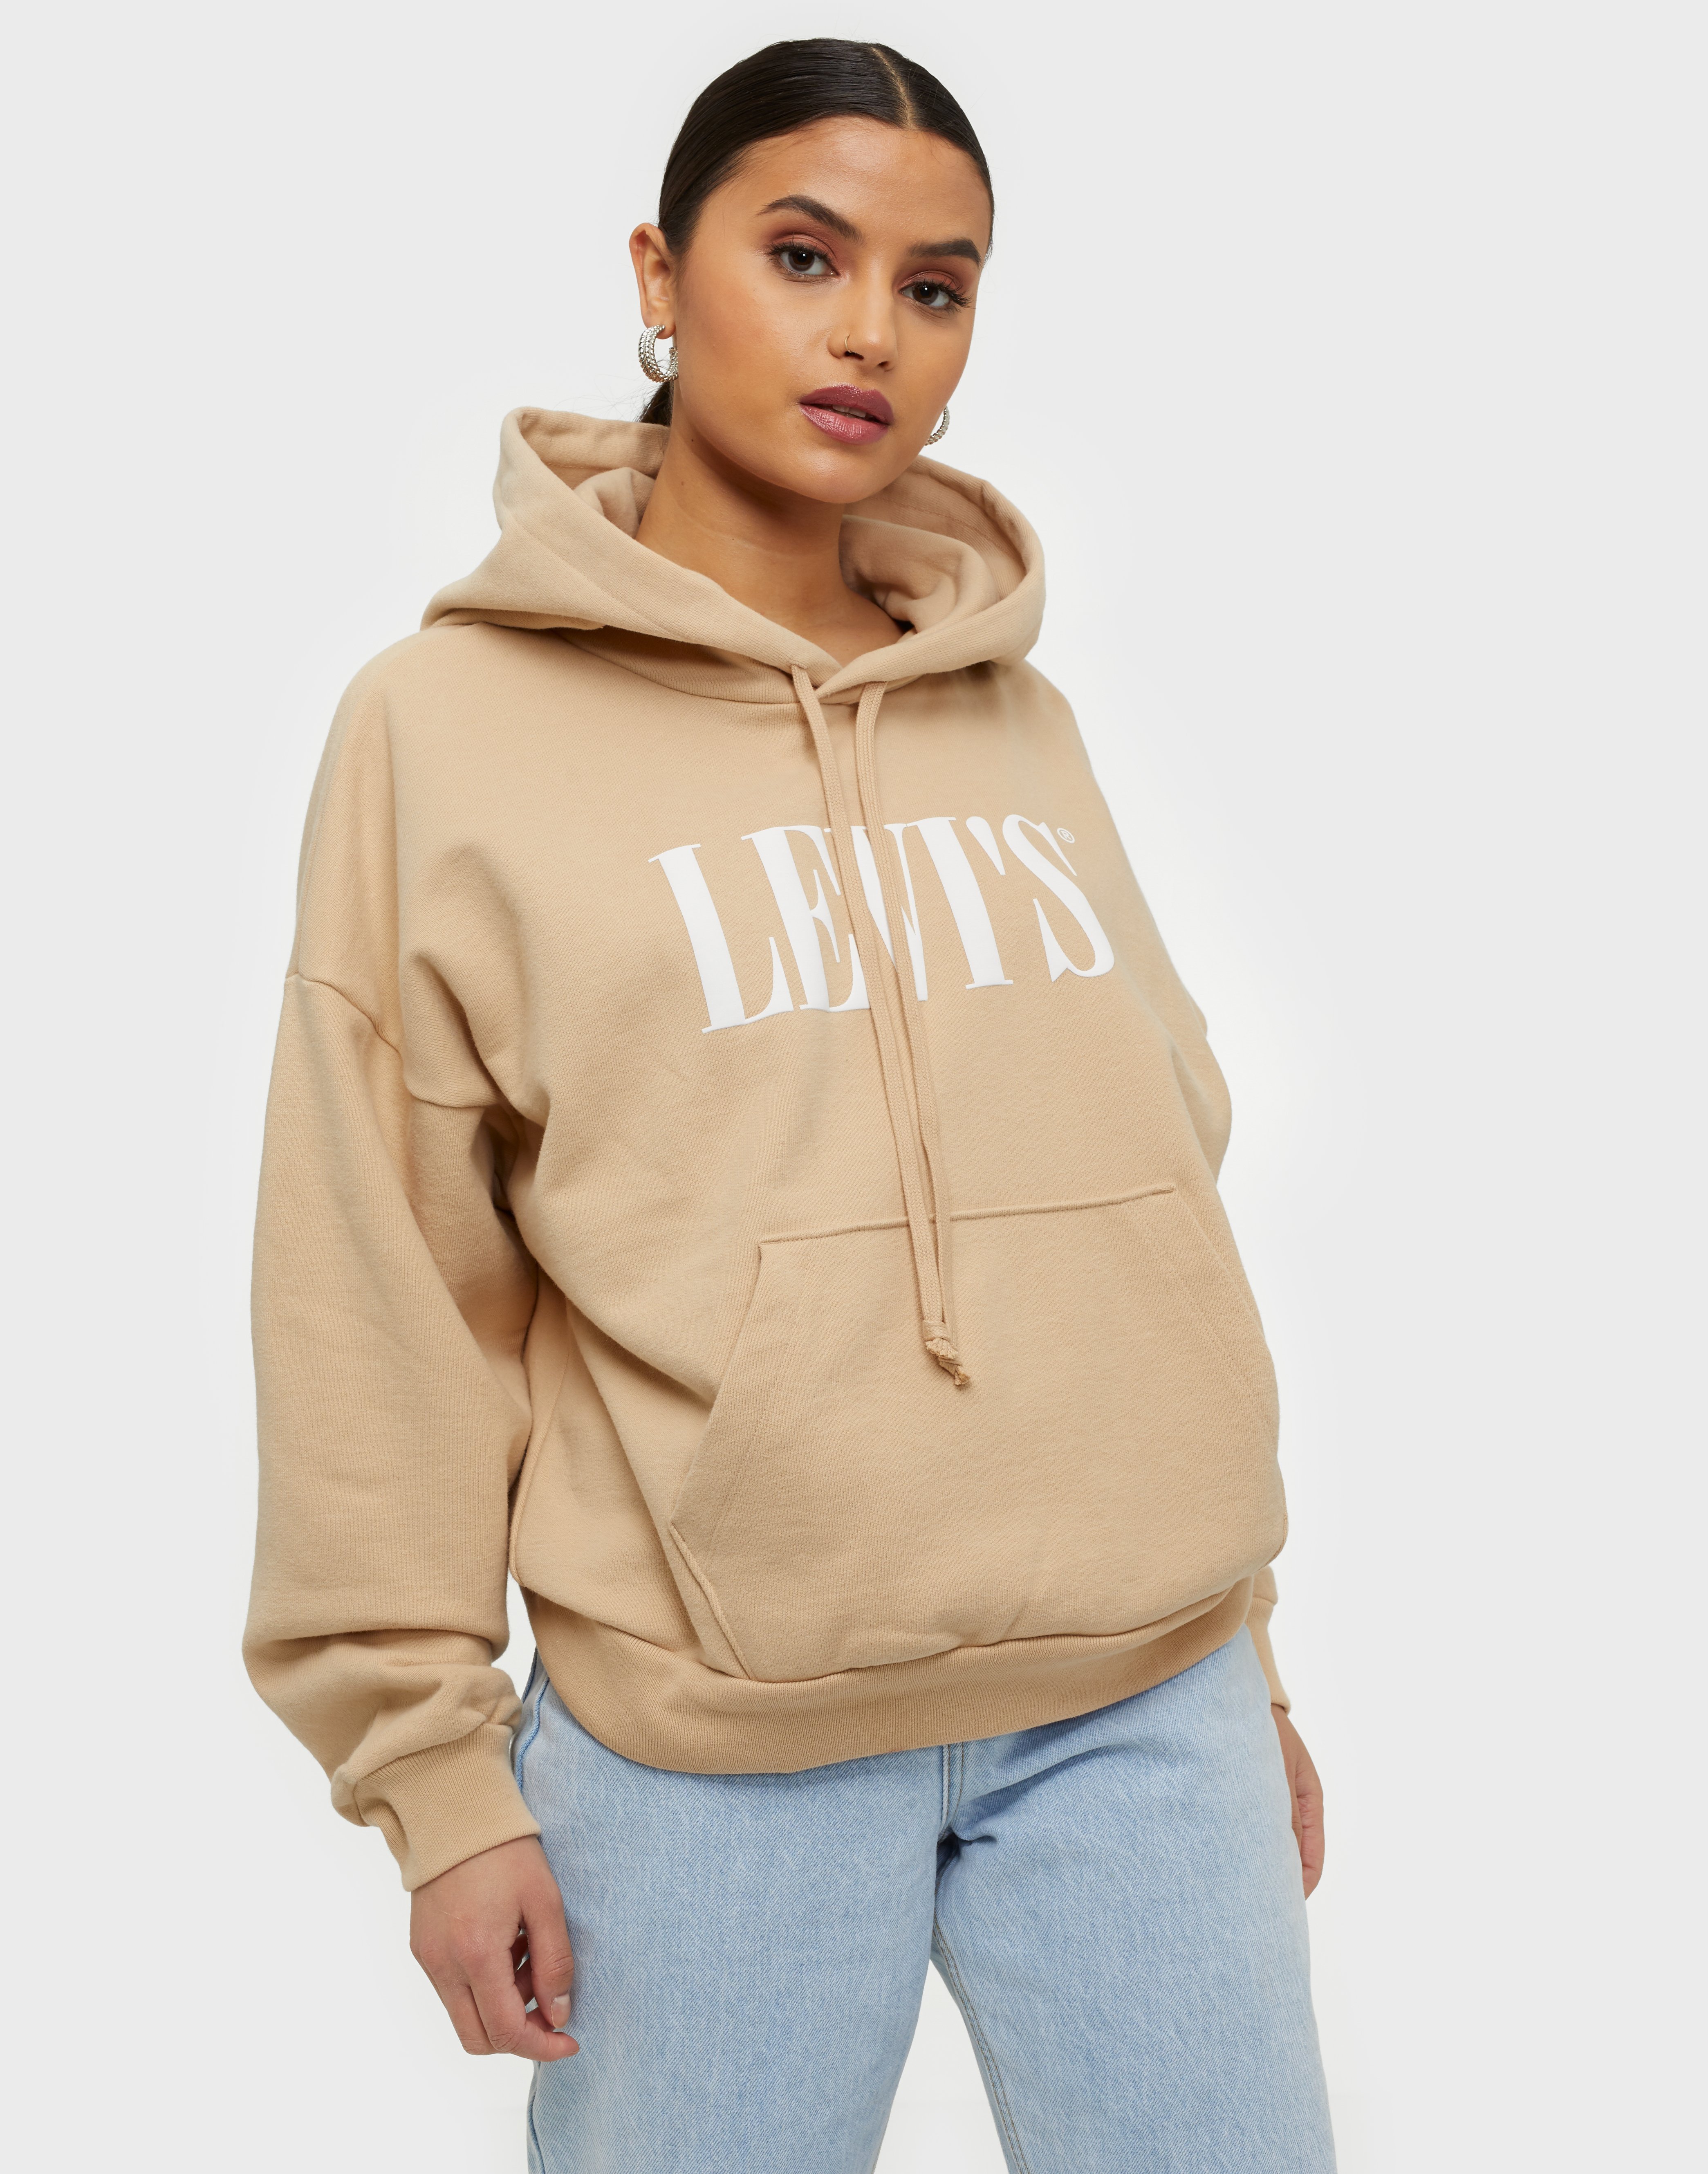 graphic hoodie levis